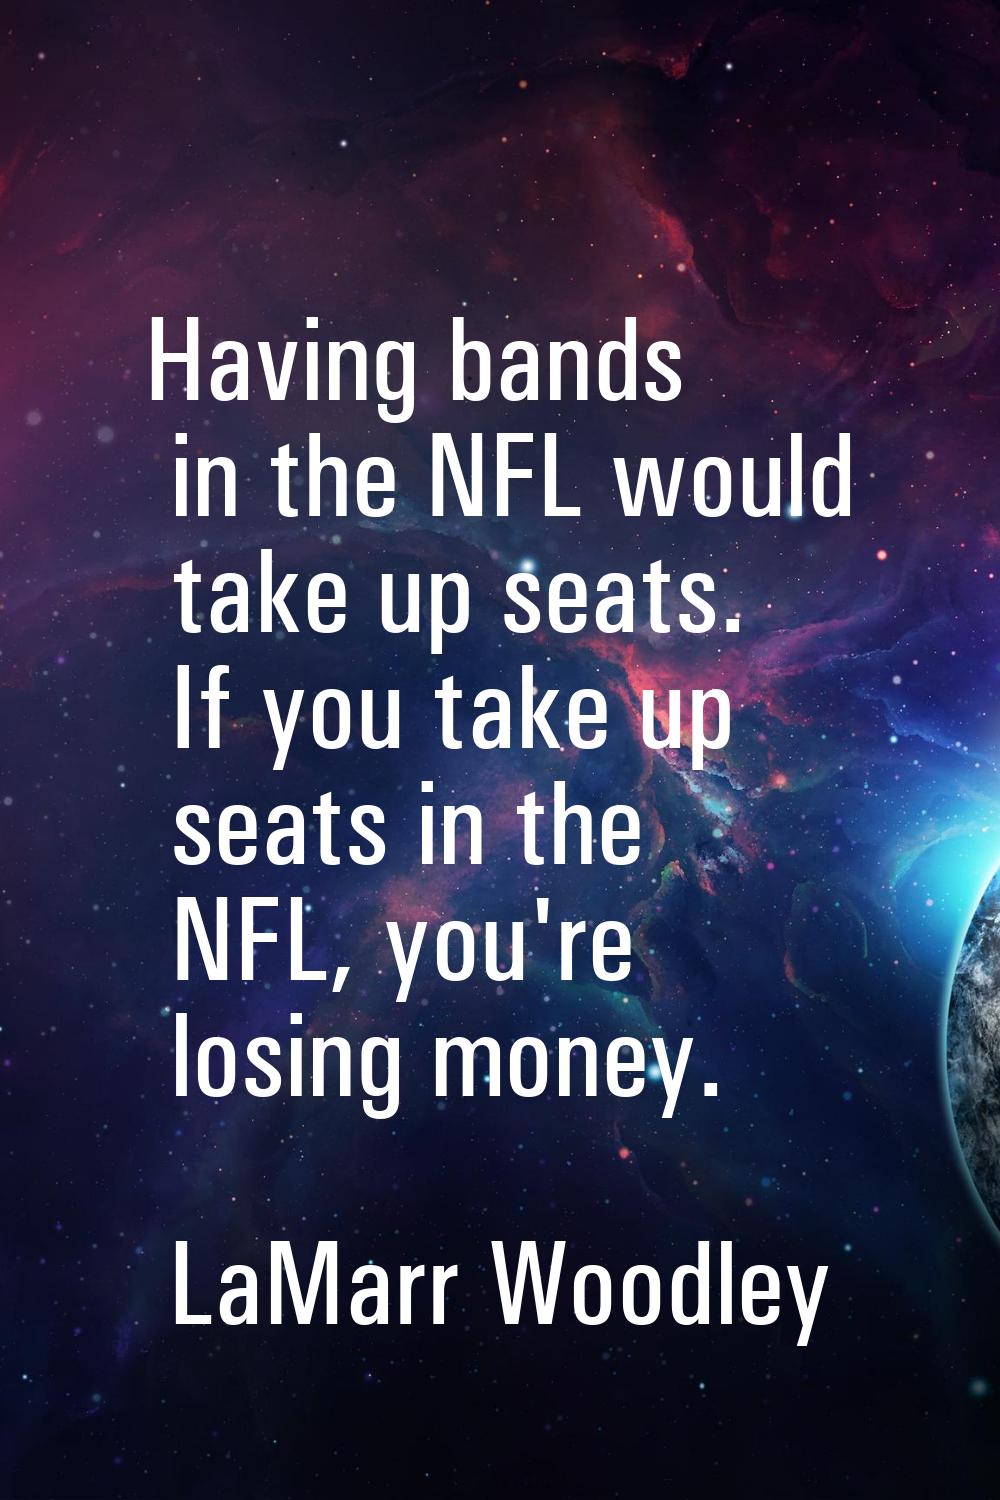 Having bands in the NFL would take up seats. If you take up seats in the NFL, you're losing money.